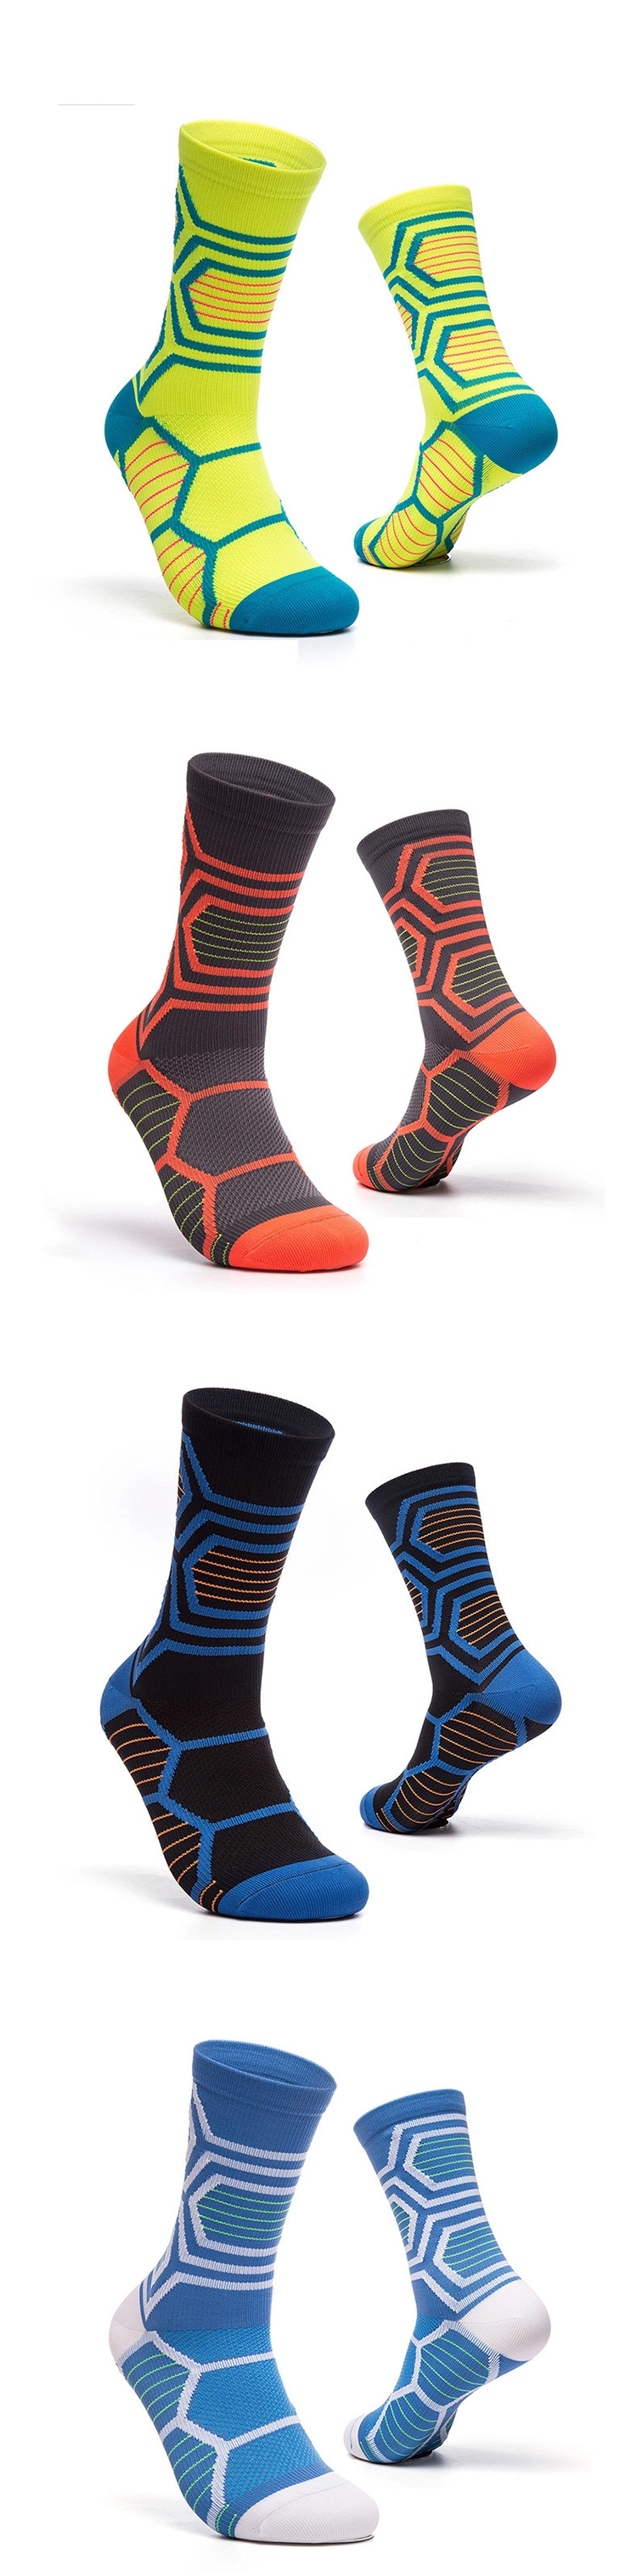 Hot Selling Outdoor Orange Accessories Long Mountain Compression Cycling Socks